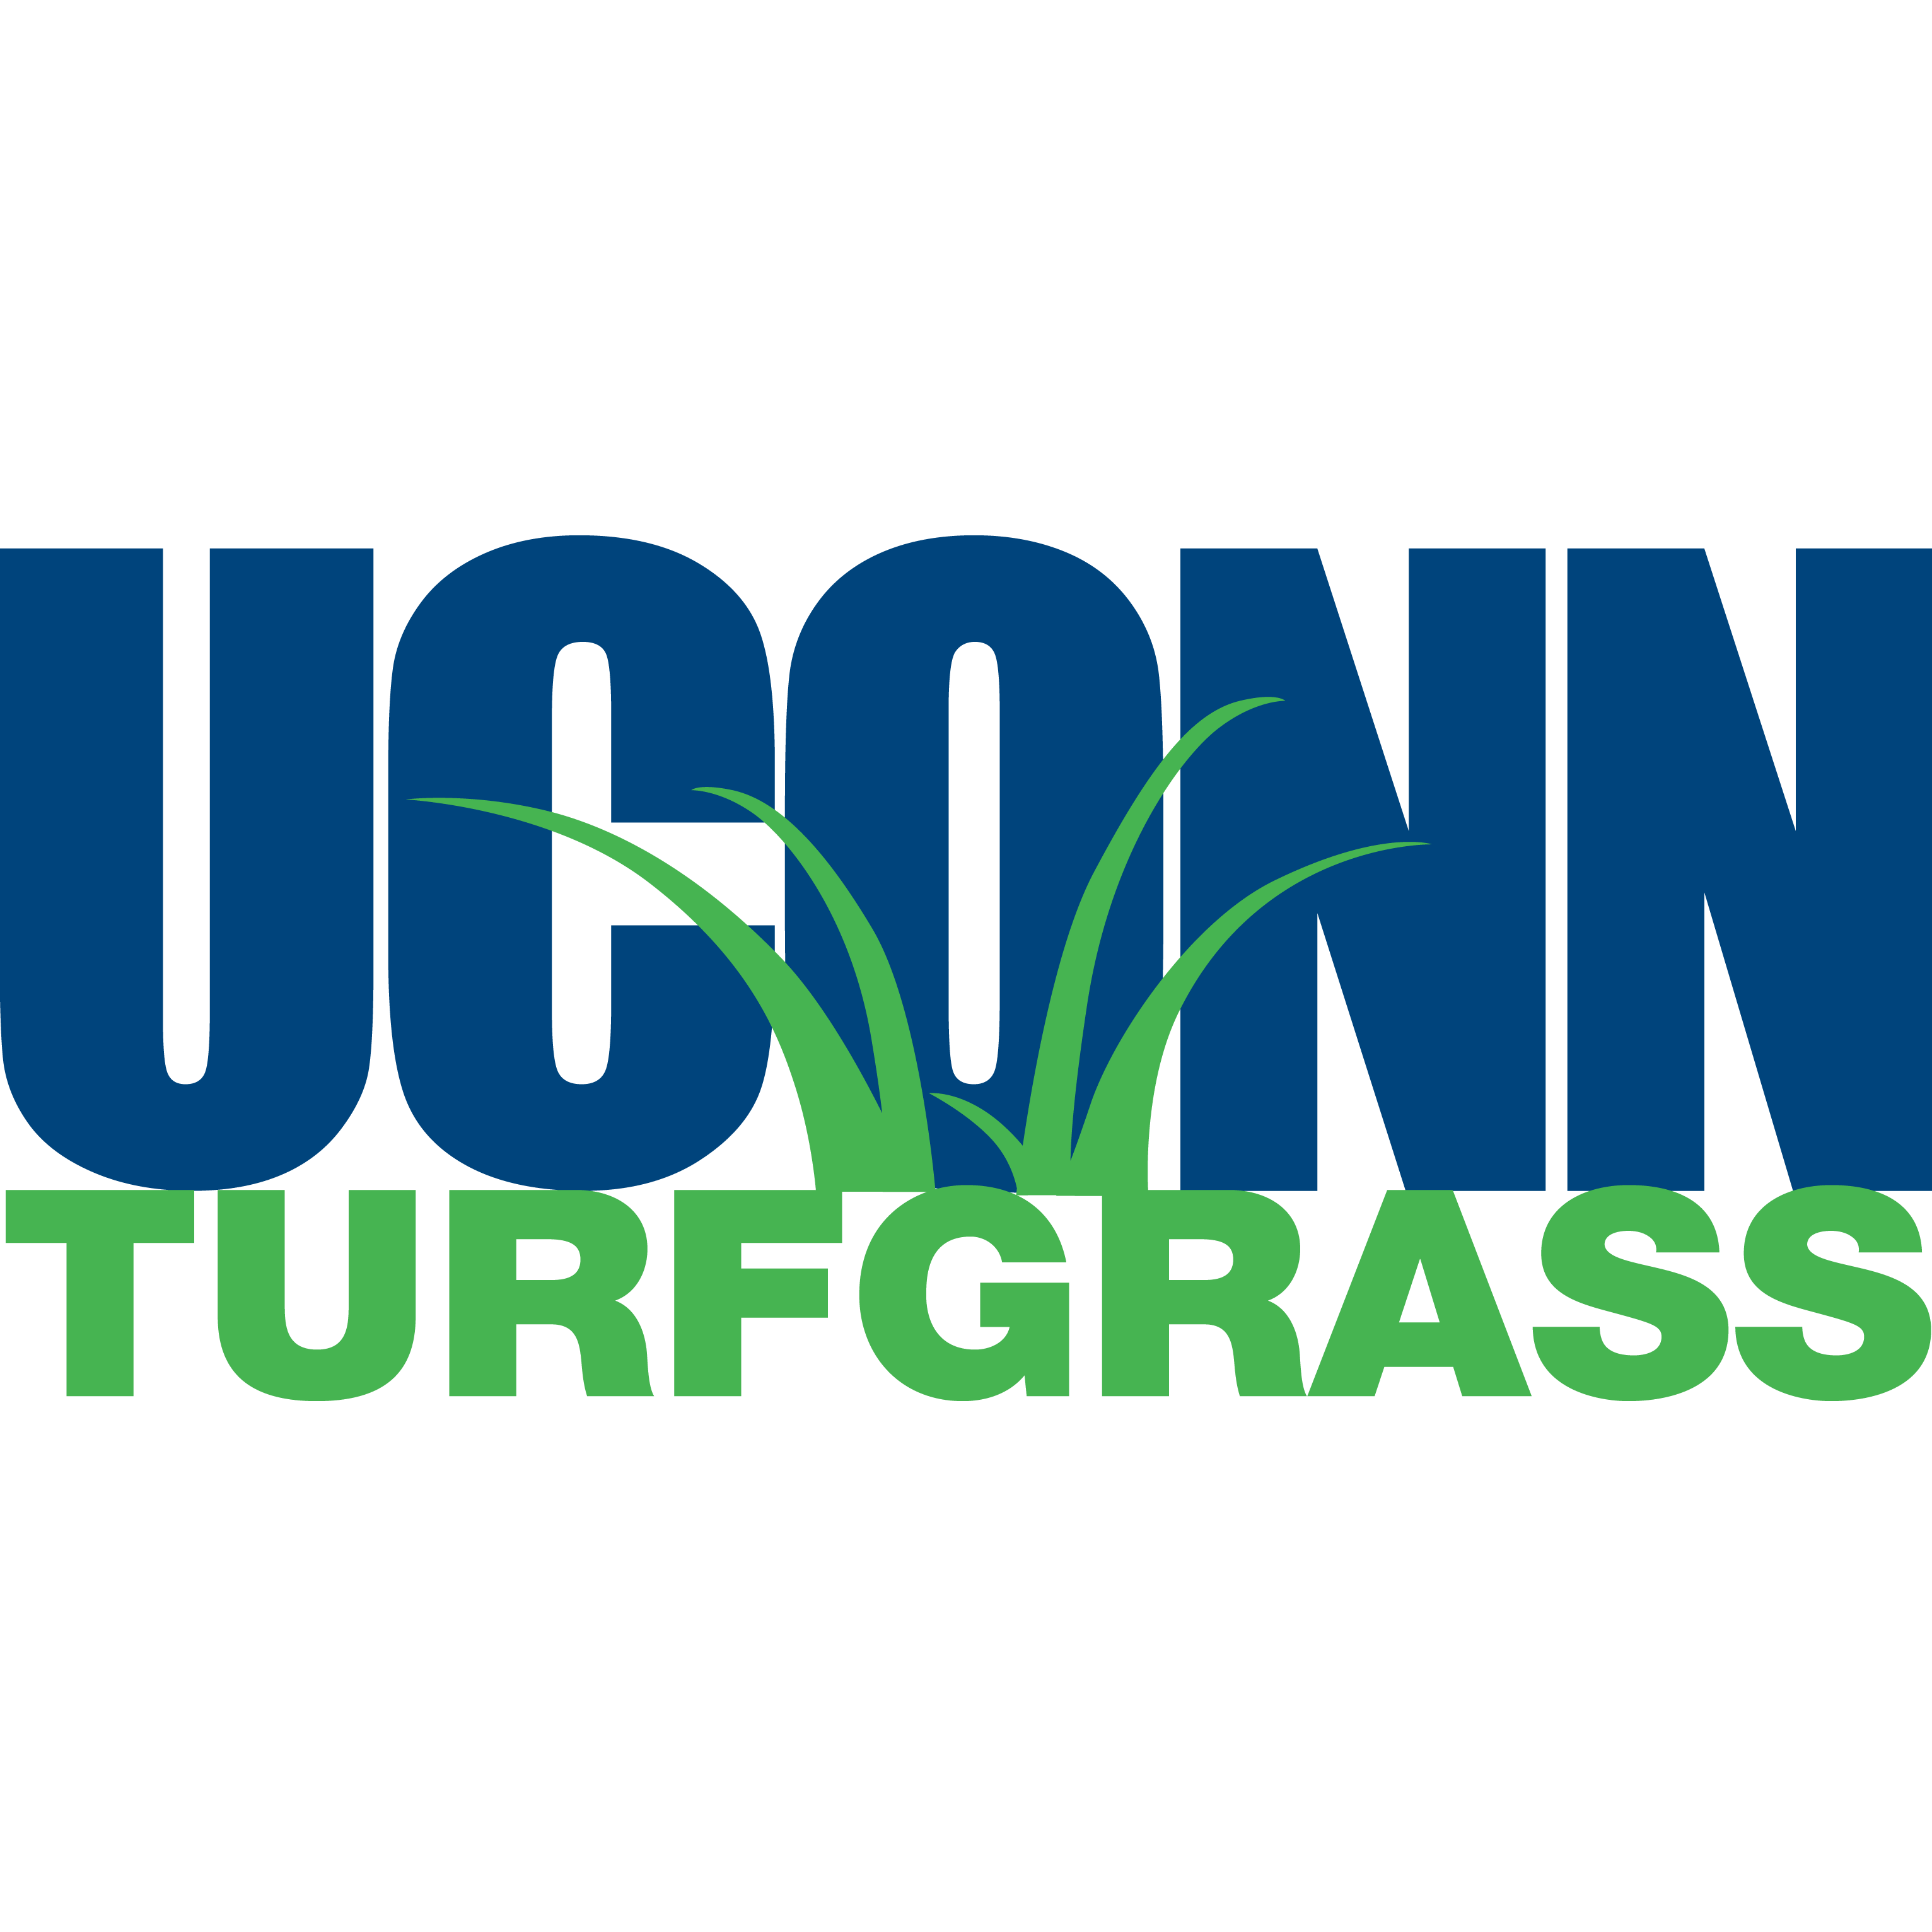 Turfgrass disease updates for turf managers in the Northeast and beyond...